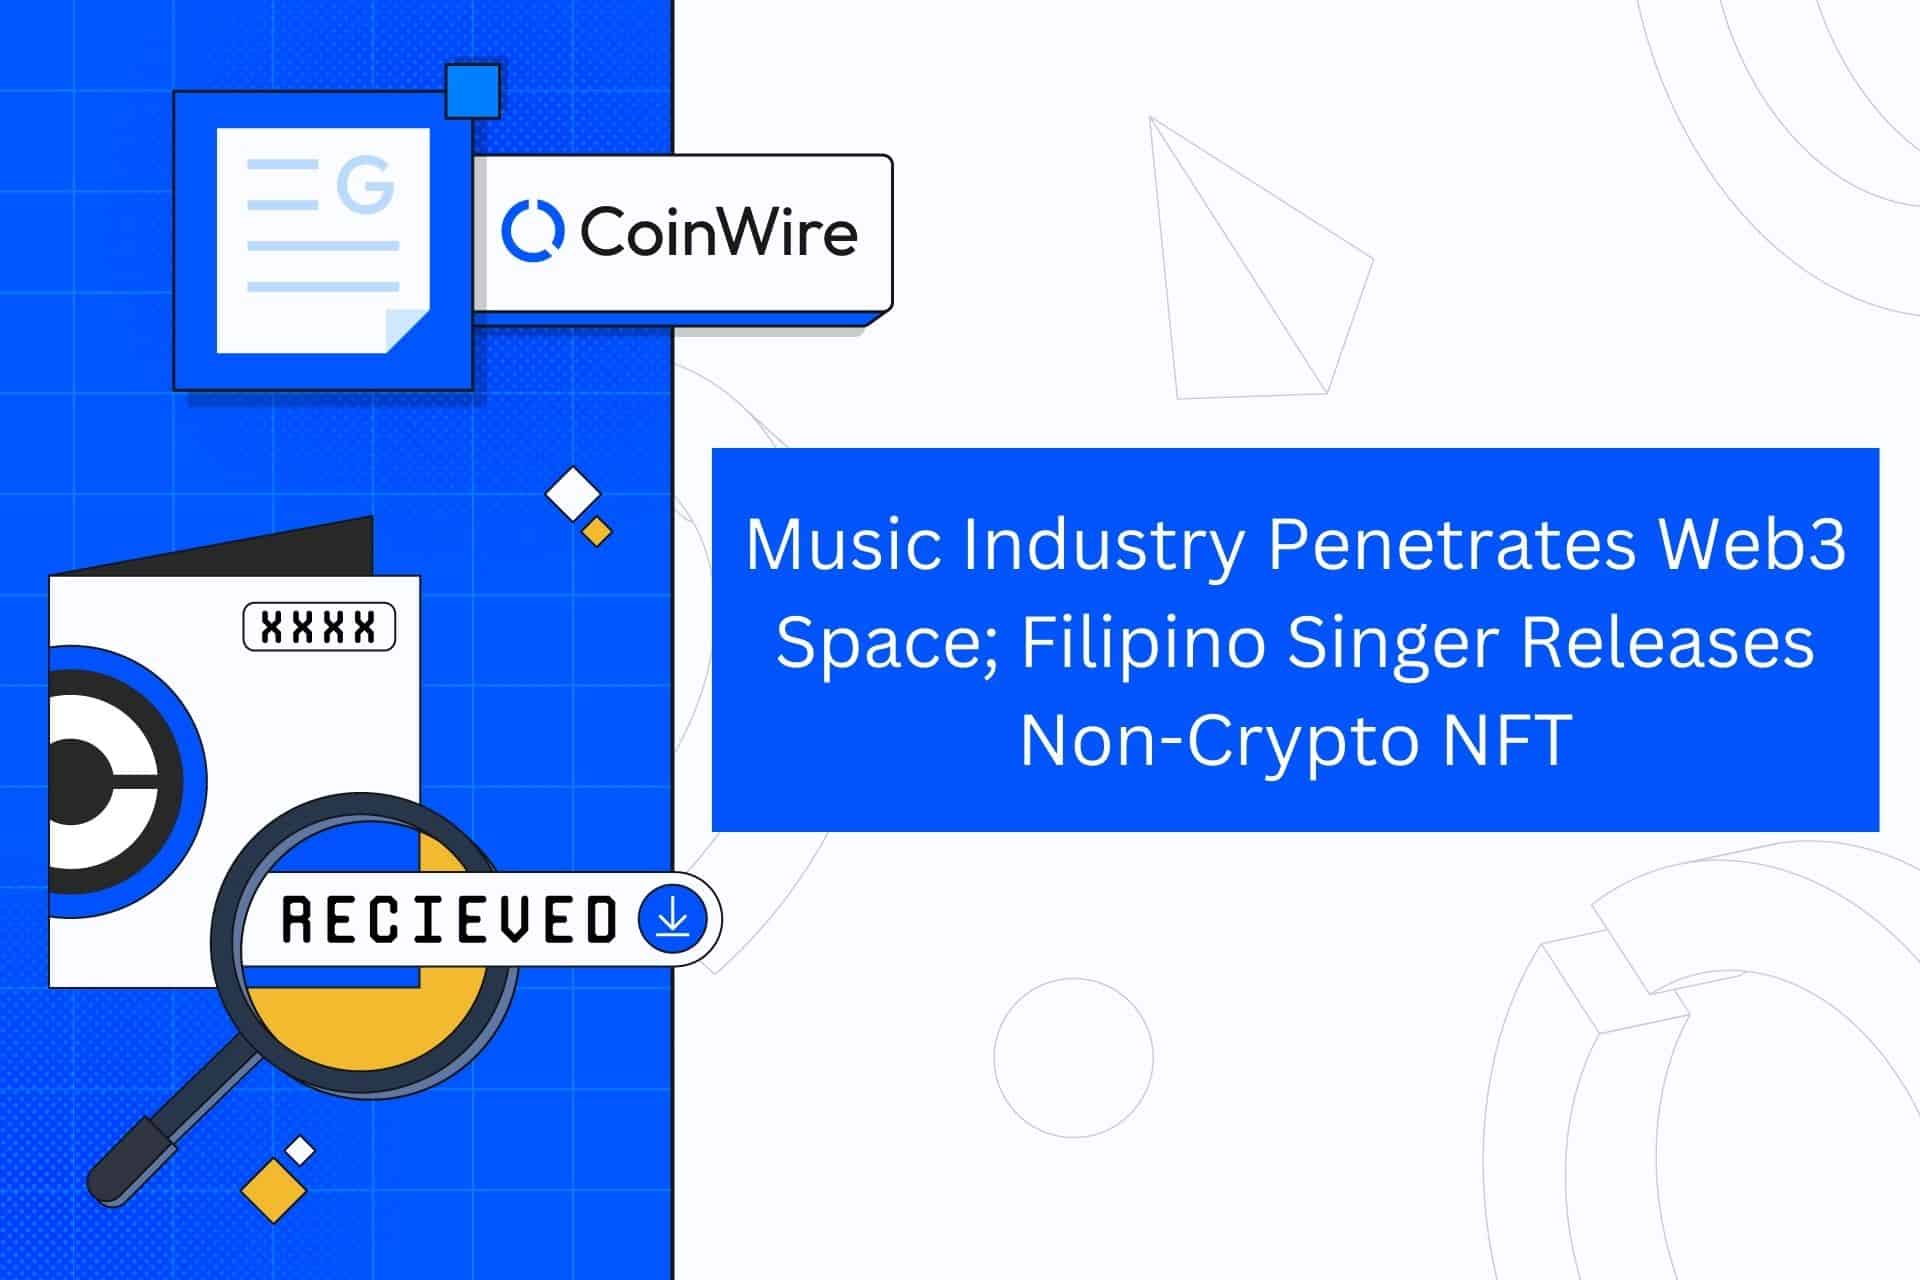 Music Industry Penetrates Web3 Space; Filipino Singer Releases Non-Crypto Nft